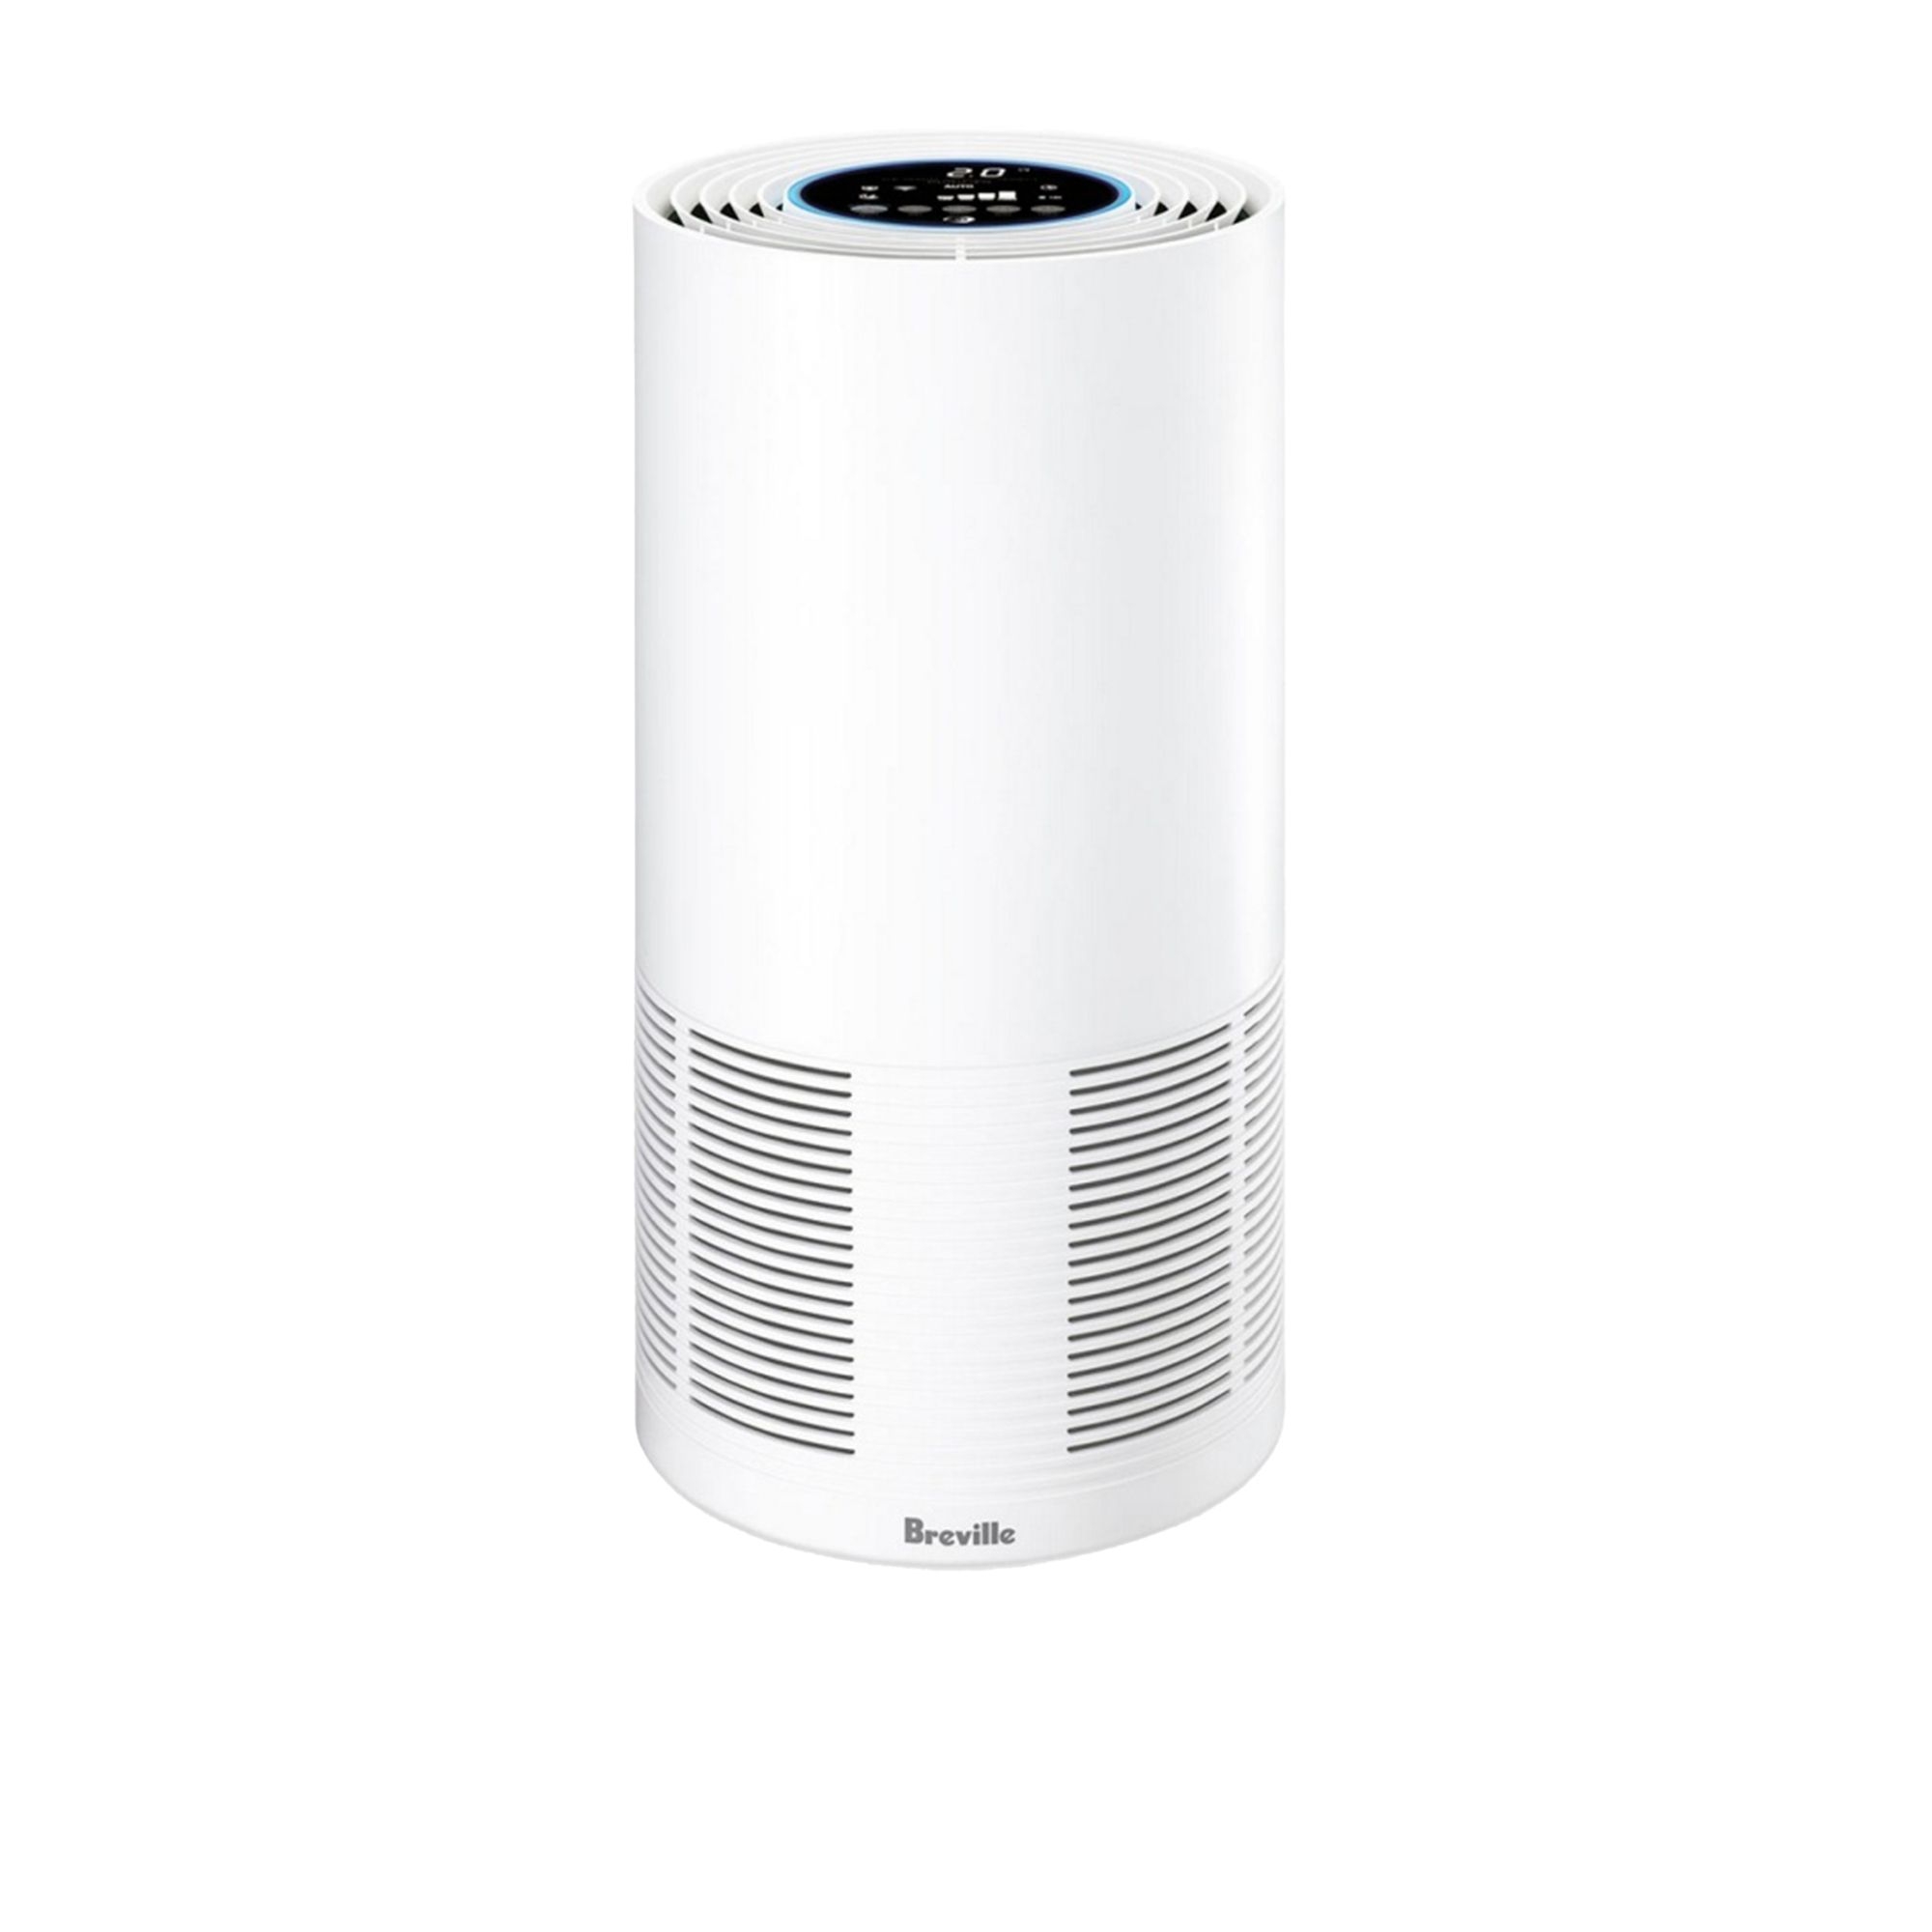 Breville The Smart AIr Plus Connect Purifier with Wi-Fi CADR 337m3/h Image 1